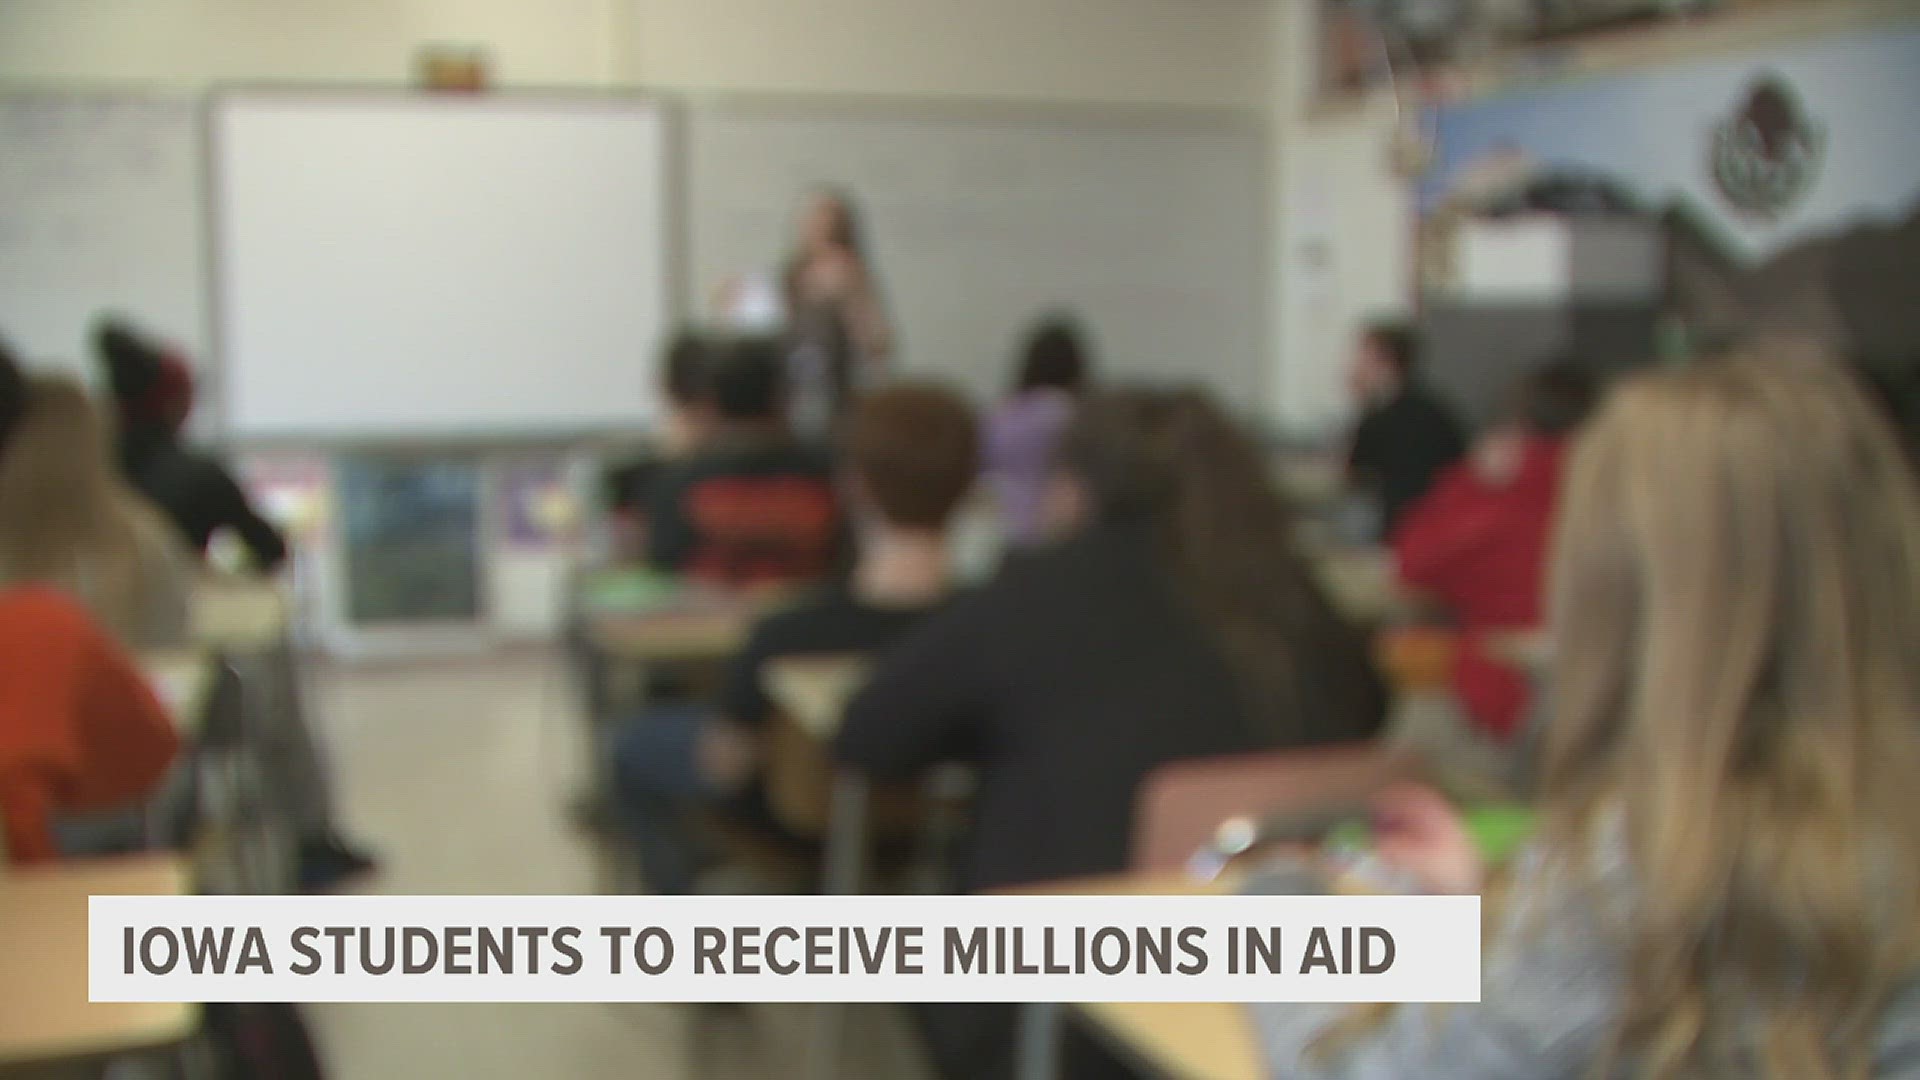 Over $25 million in grants are being dispersed from the US Department of Education to help low-income middle and high school students afford college.